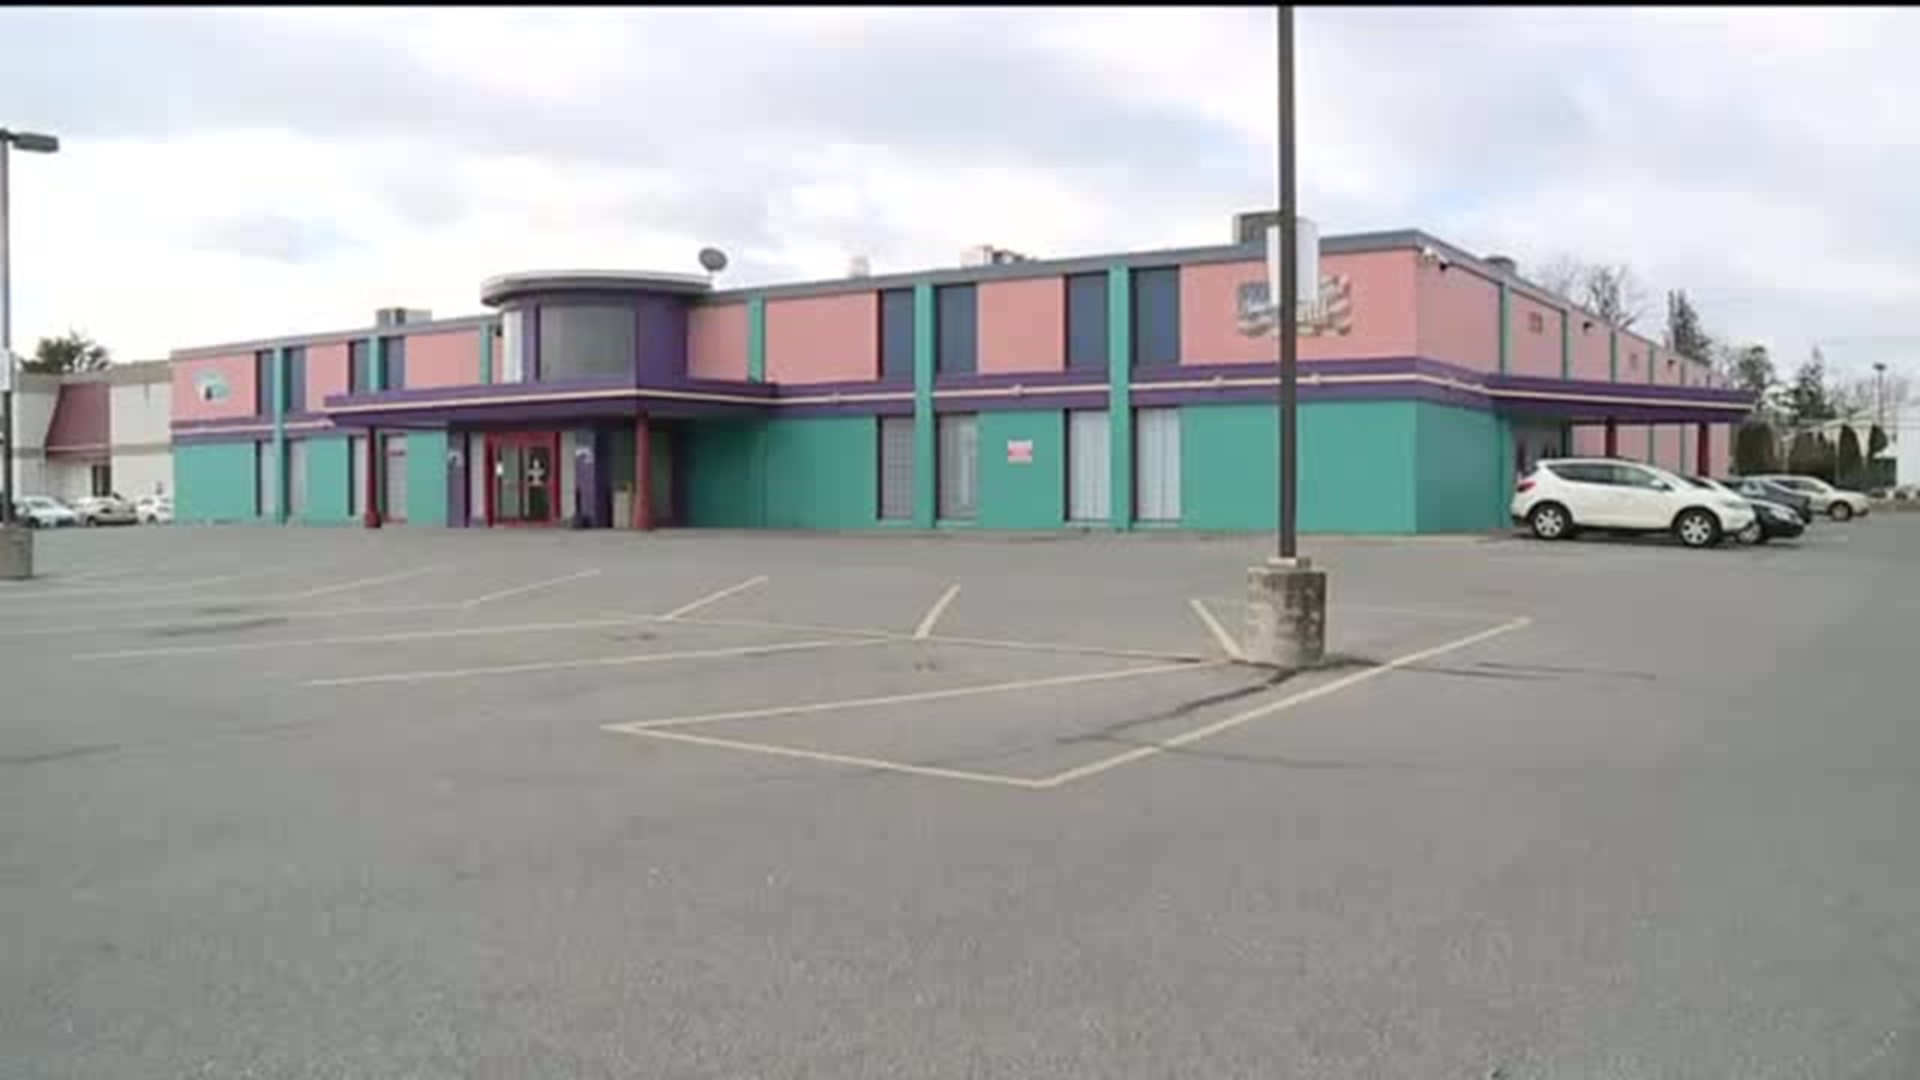 Man Accused of Stealing $60k from Bowling Alley